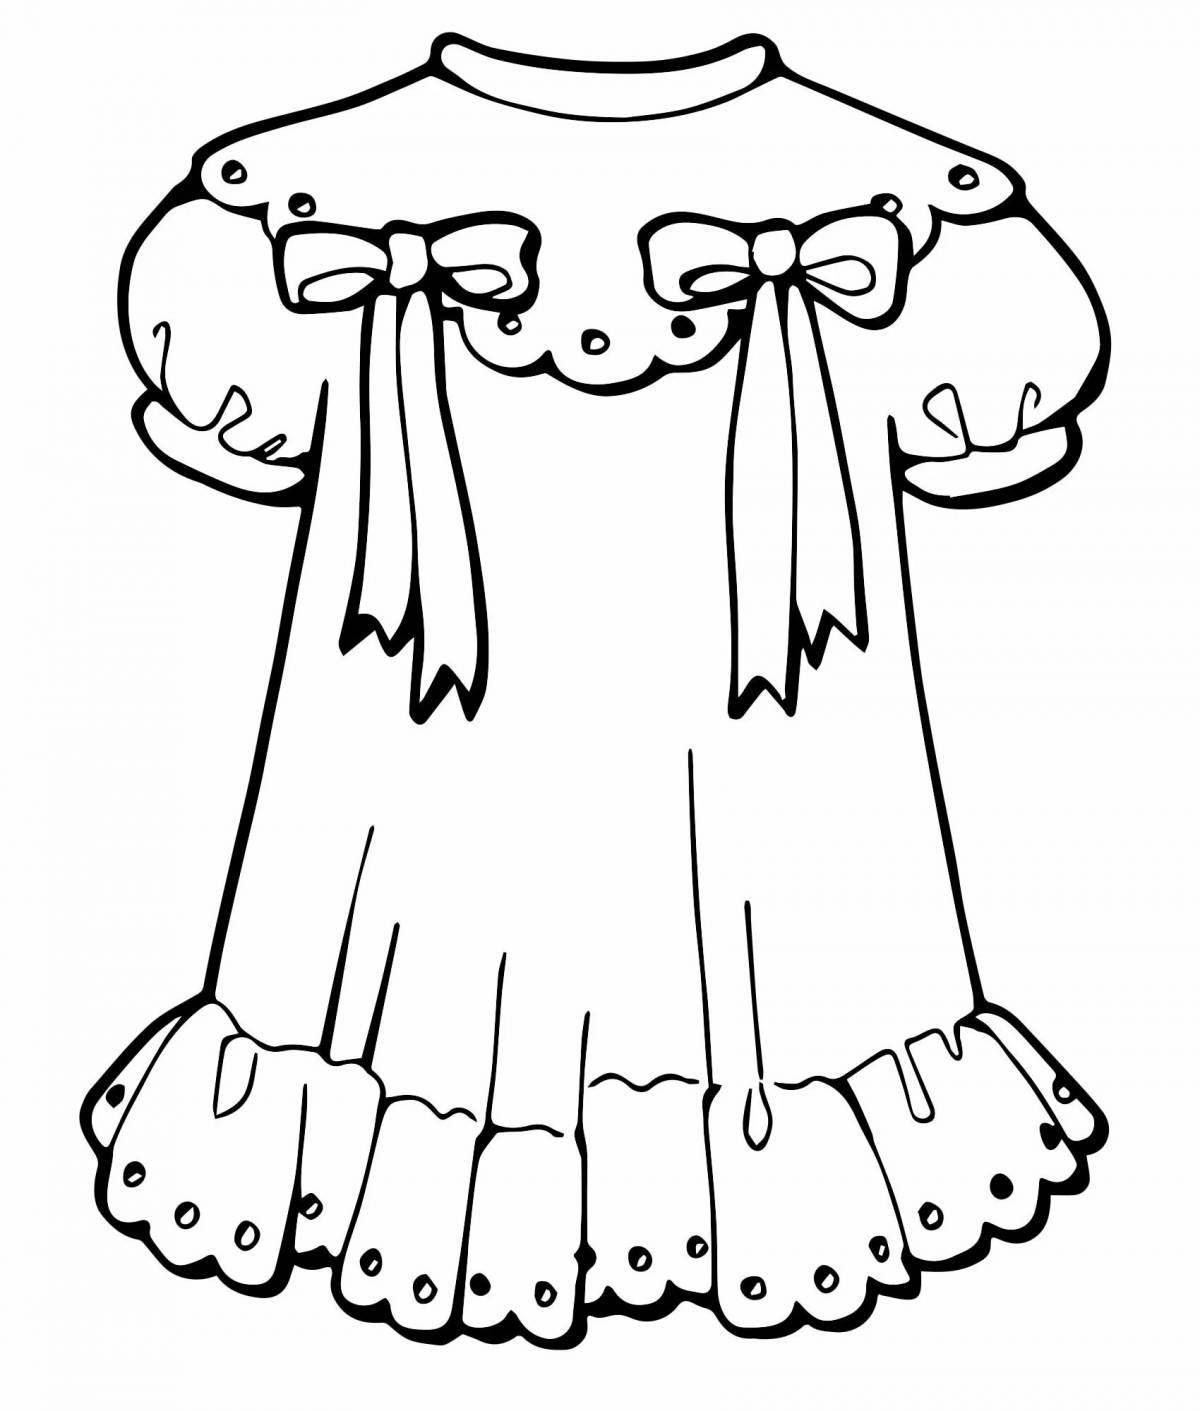 Glowing dress coloring book for 4-5 year olds